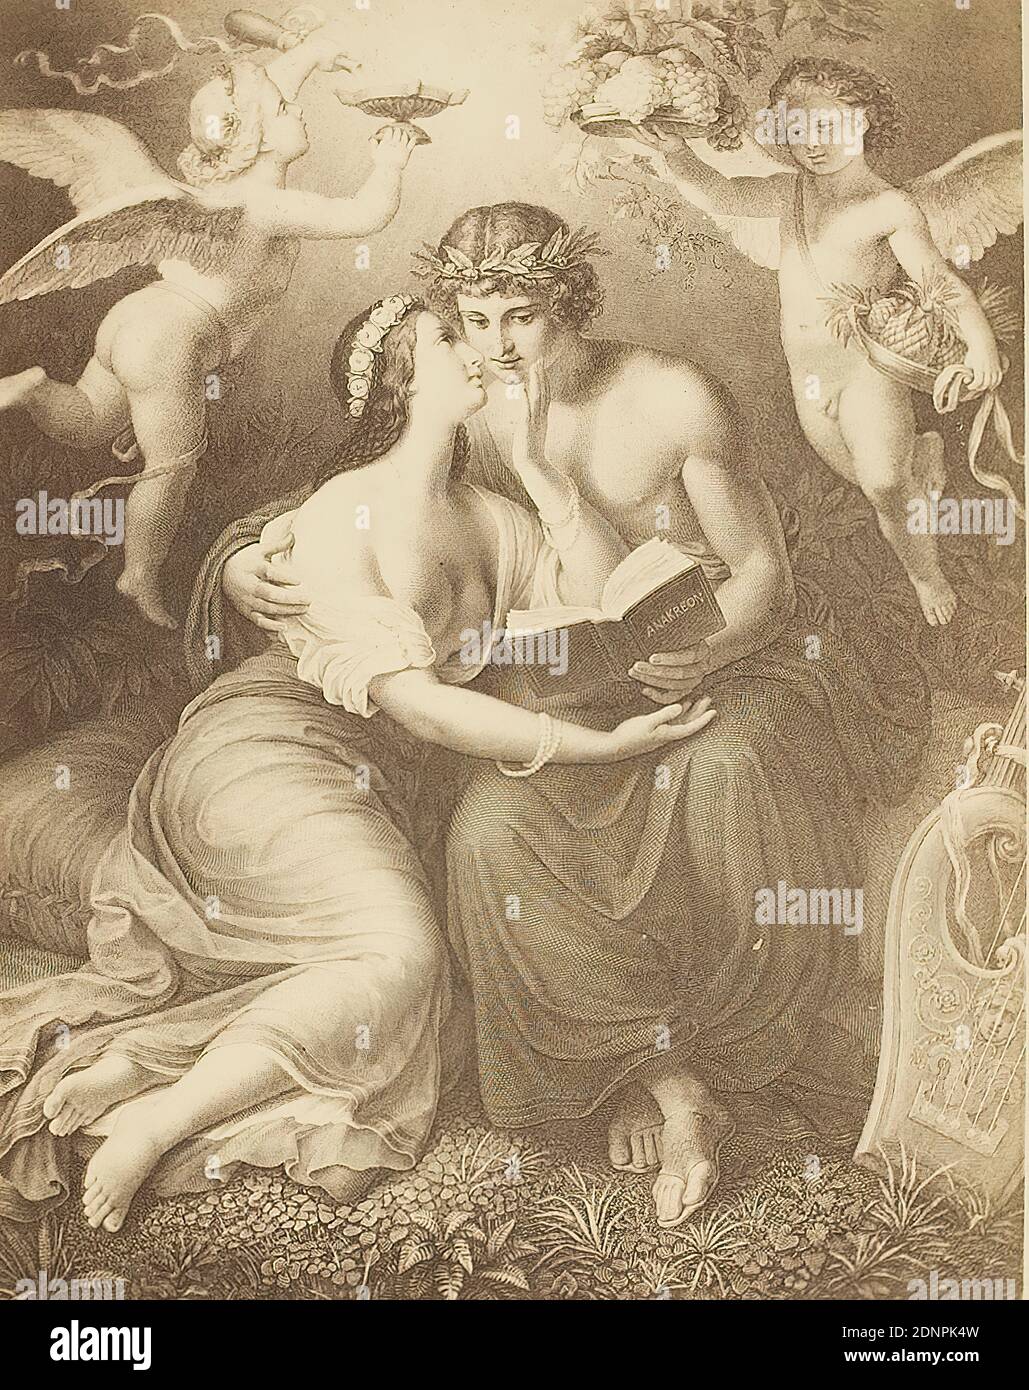 Anacreon, albumin paper, black and white positive process, image size: height: 24,30 cm; width: 18,50 cm, on the sheet noted: Alinari 189th, the poet and his muse, art Stock Photo